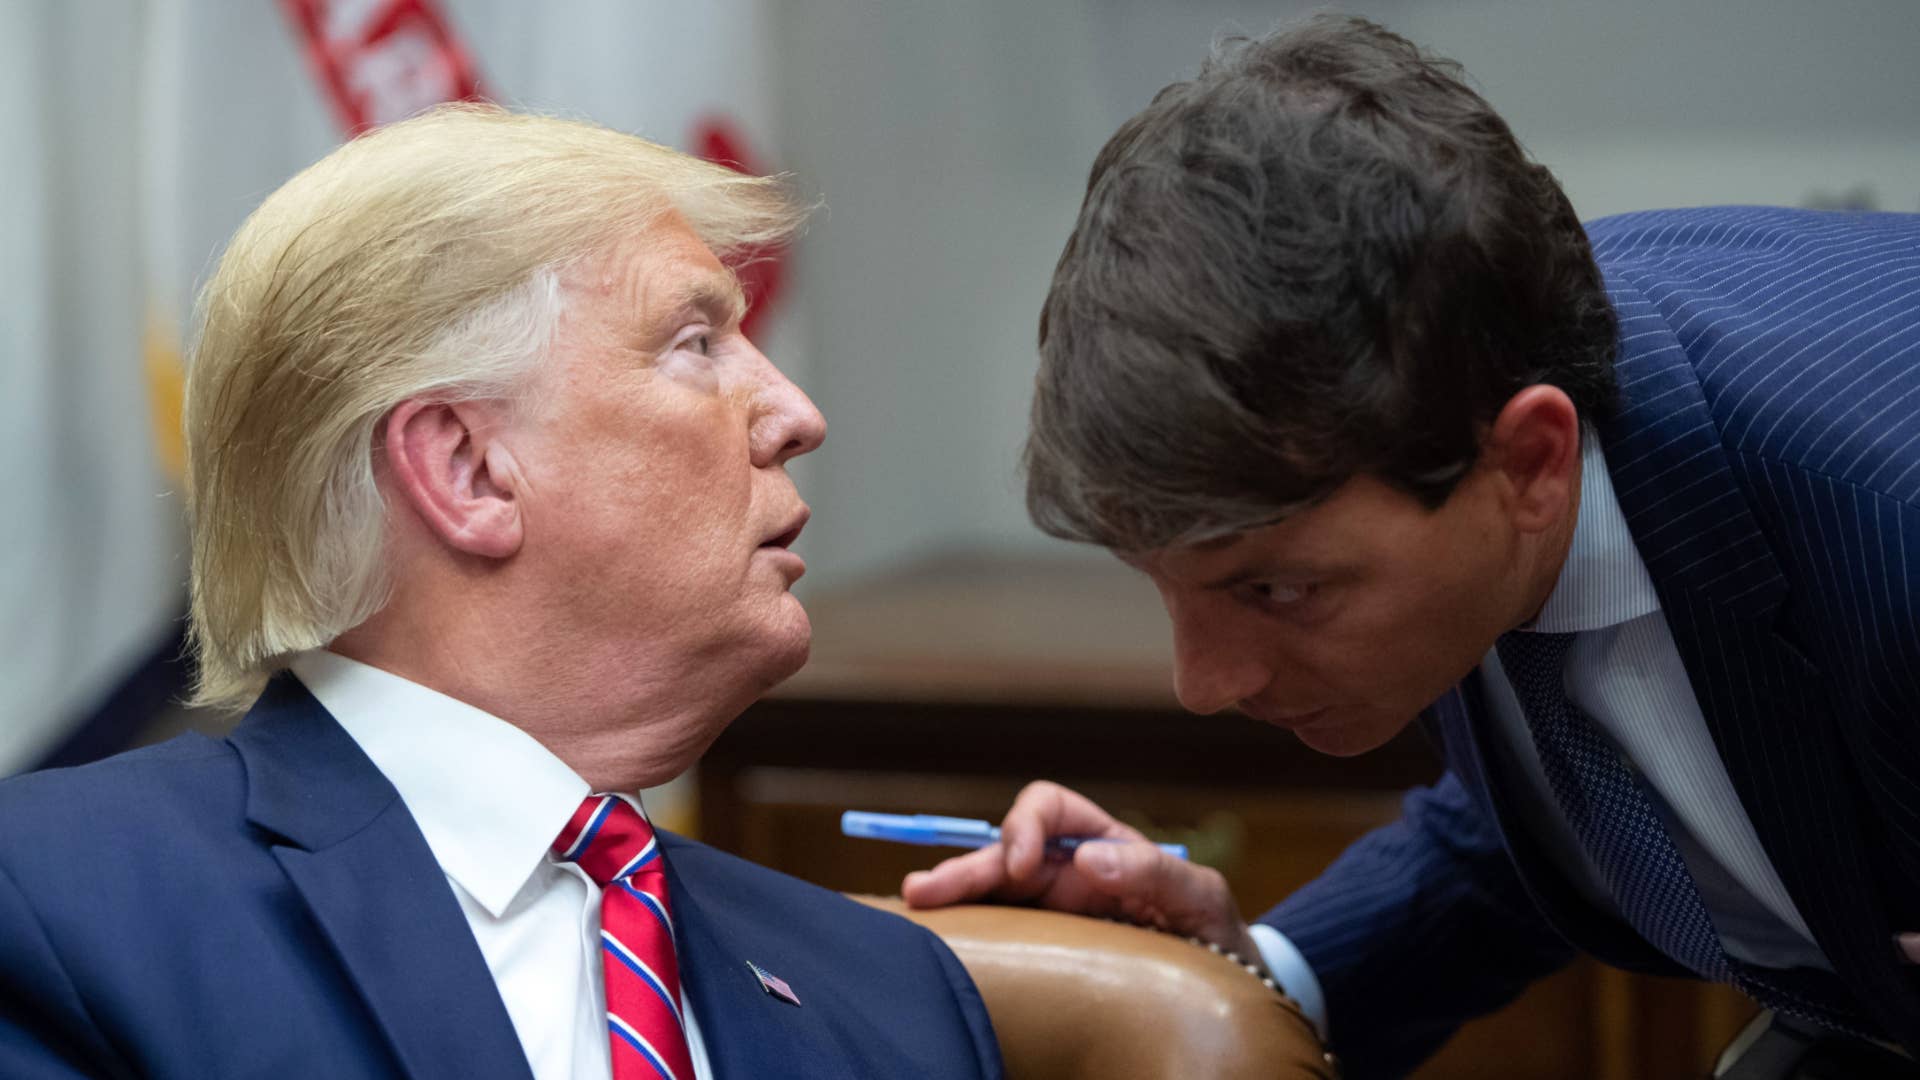 Donald Trump speaks with Hogan Gidley during a meeting on the opioid epidemic.